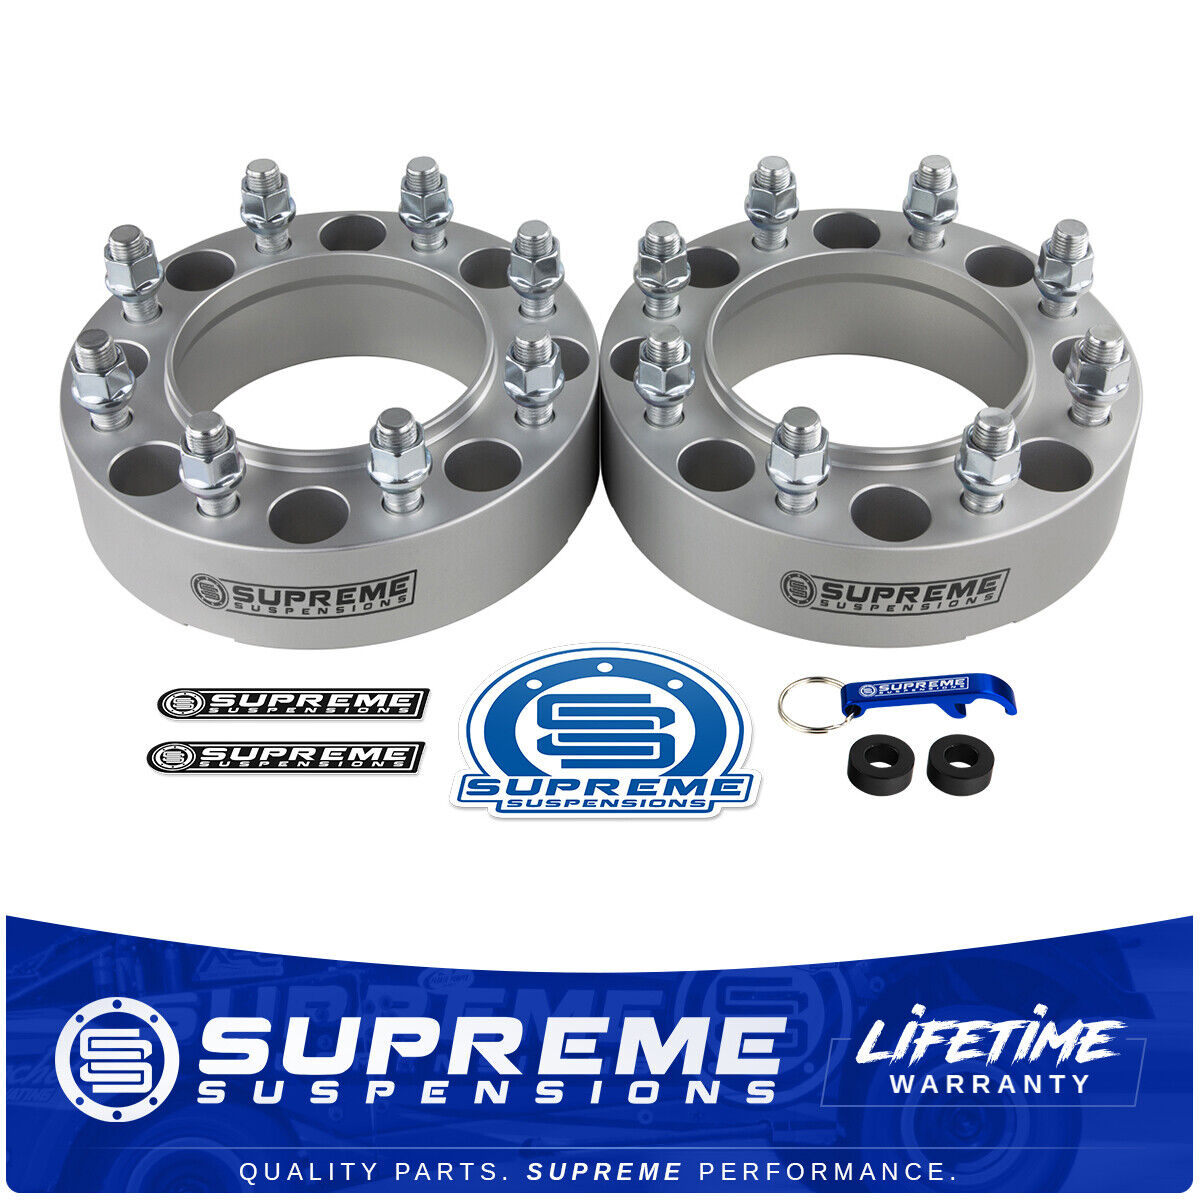 Wheel Spacers For Ford Excursion F-250 F-350 Super Duty - 8x170mm Studs M14x1.5